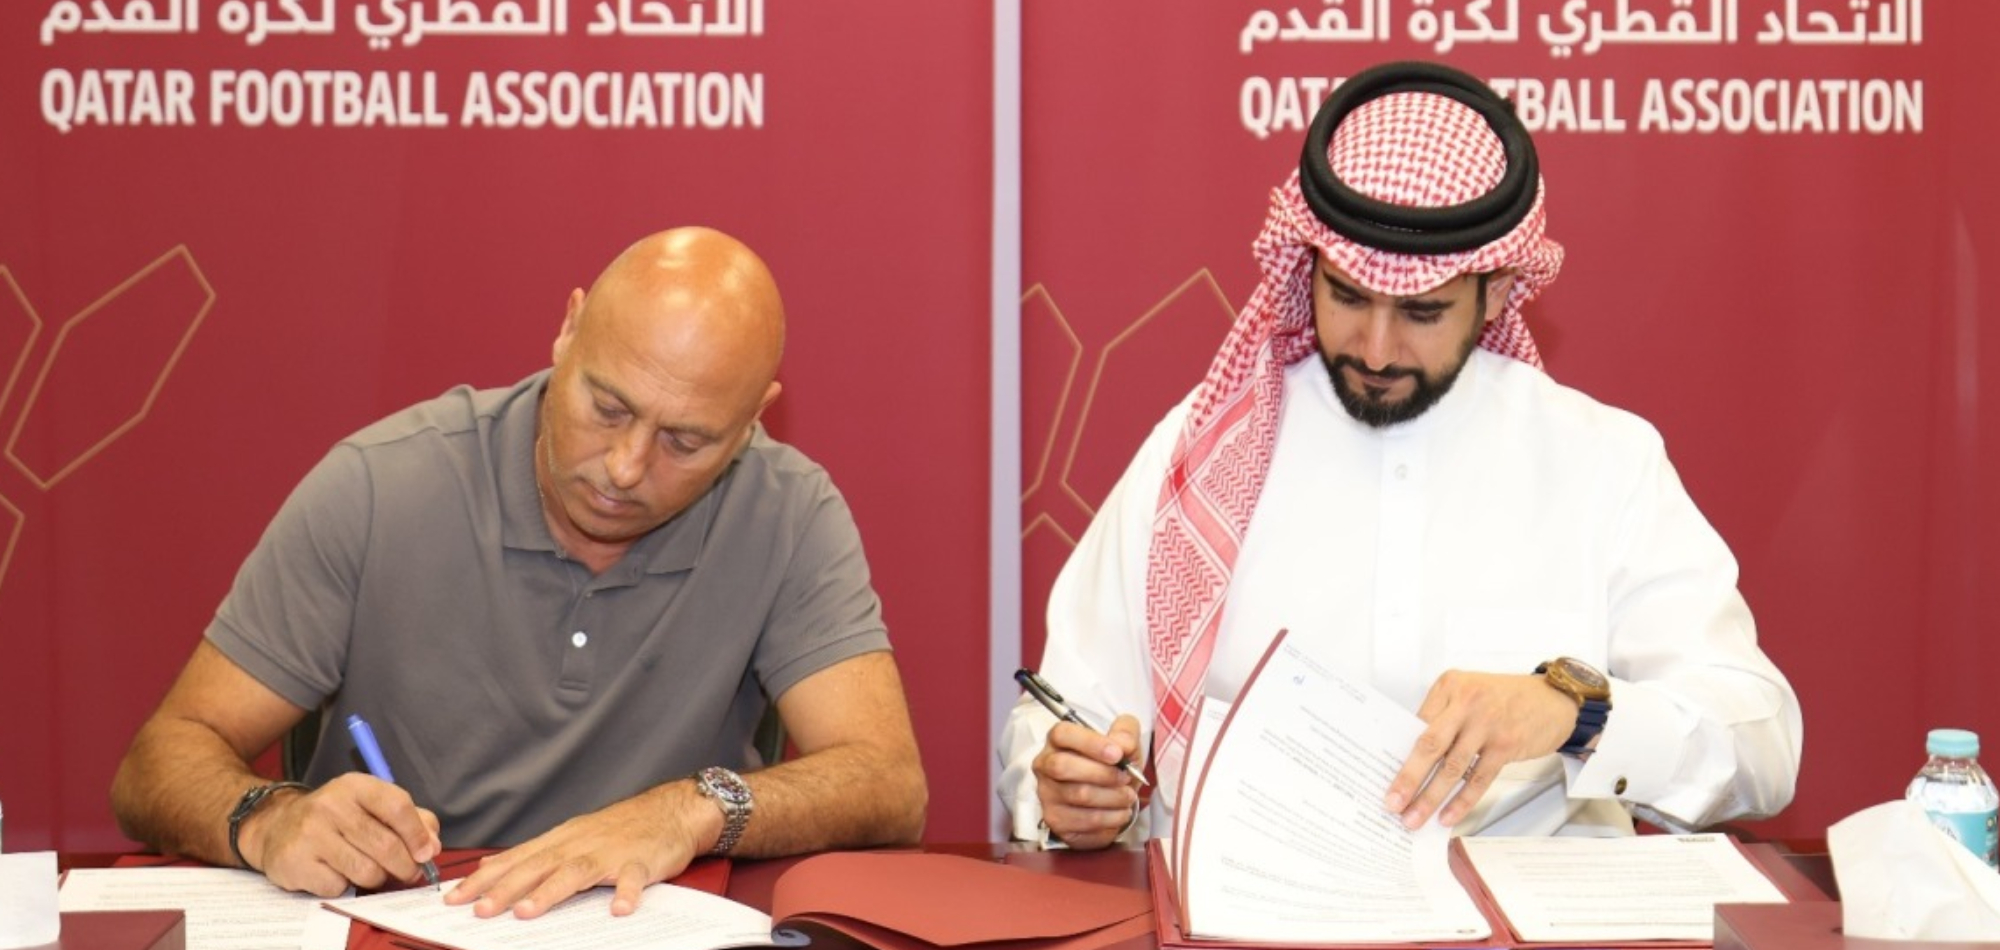 QFA signs contract with Marquez Lopez until 2026